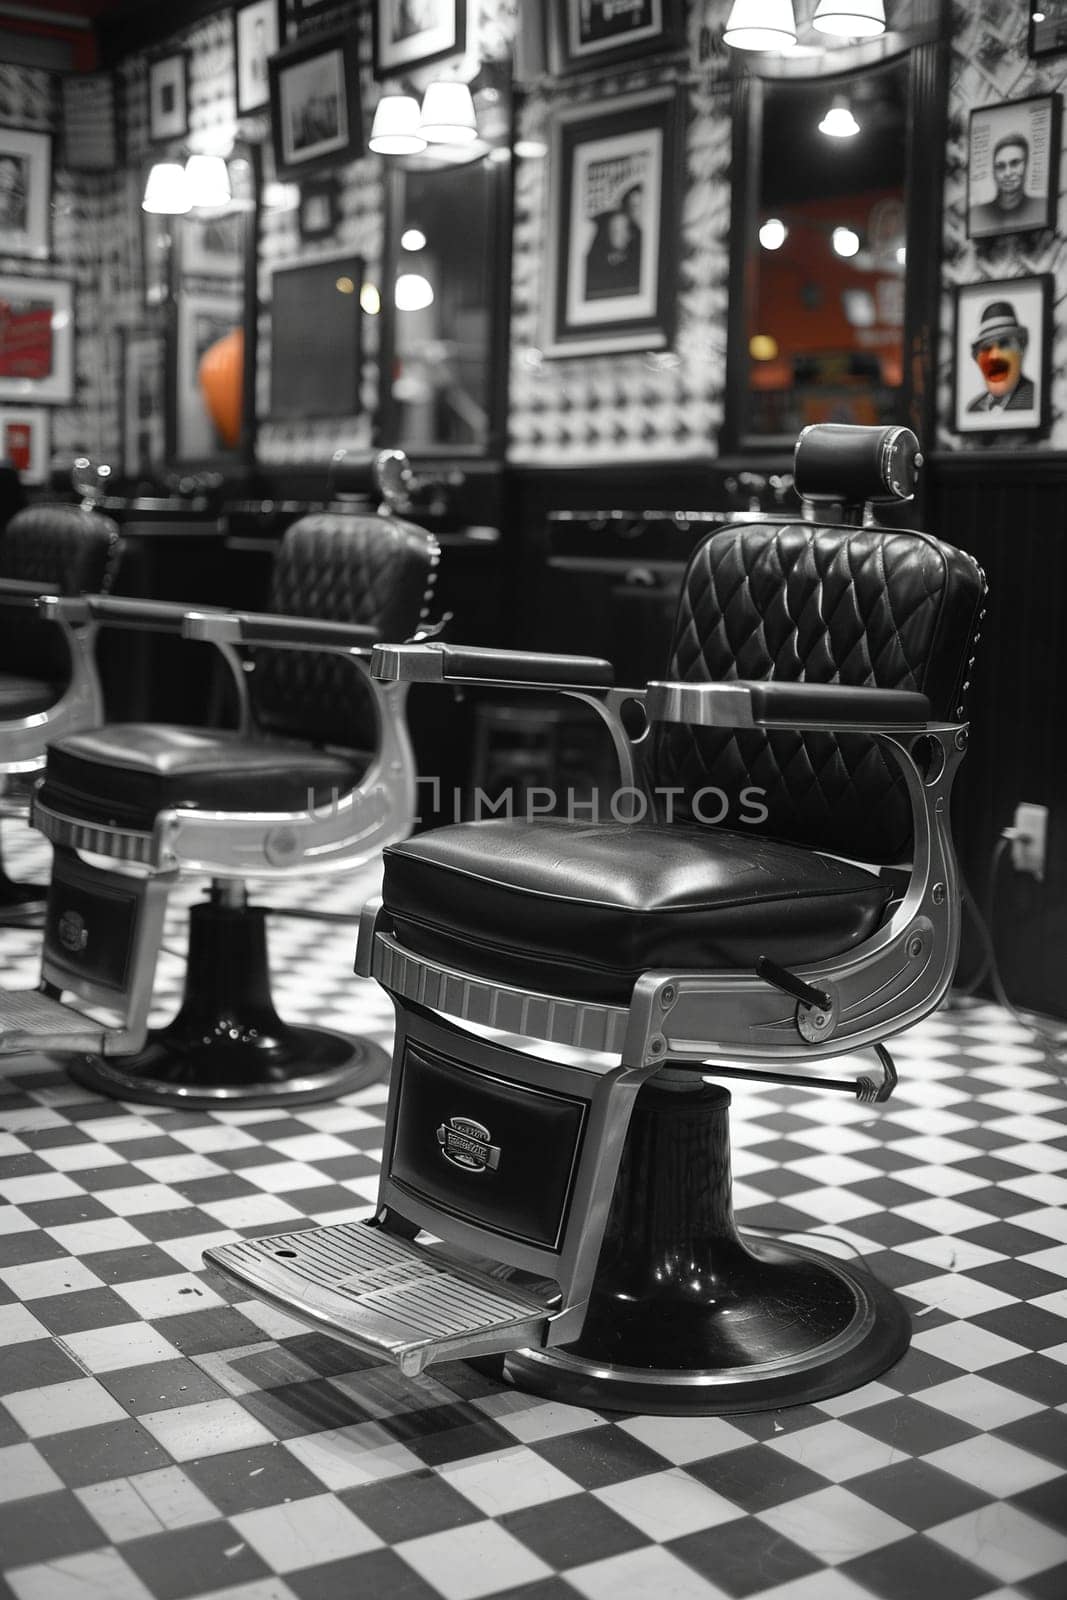 Barbershop Razors Carve Style in Business of Men's Fashion and Grooming, Chairs and clippers buzz a narrative of tradition and modern style in the barbershop business.